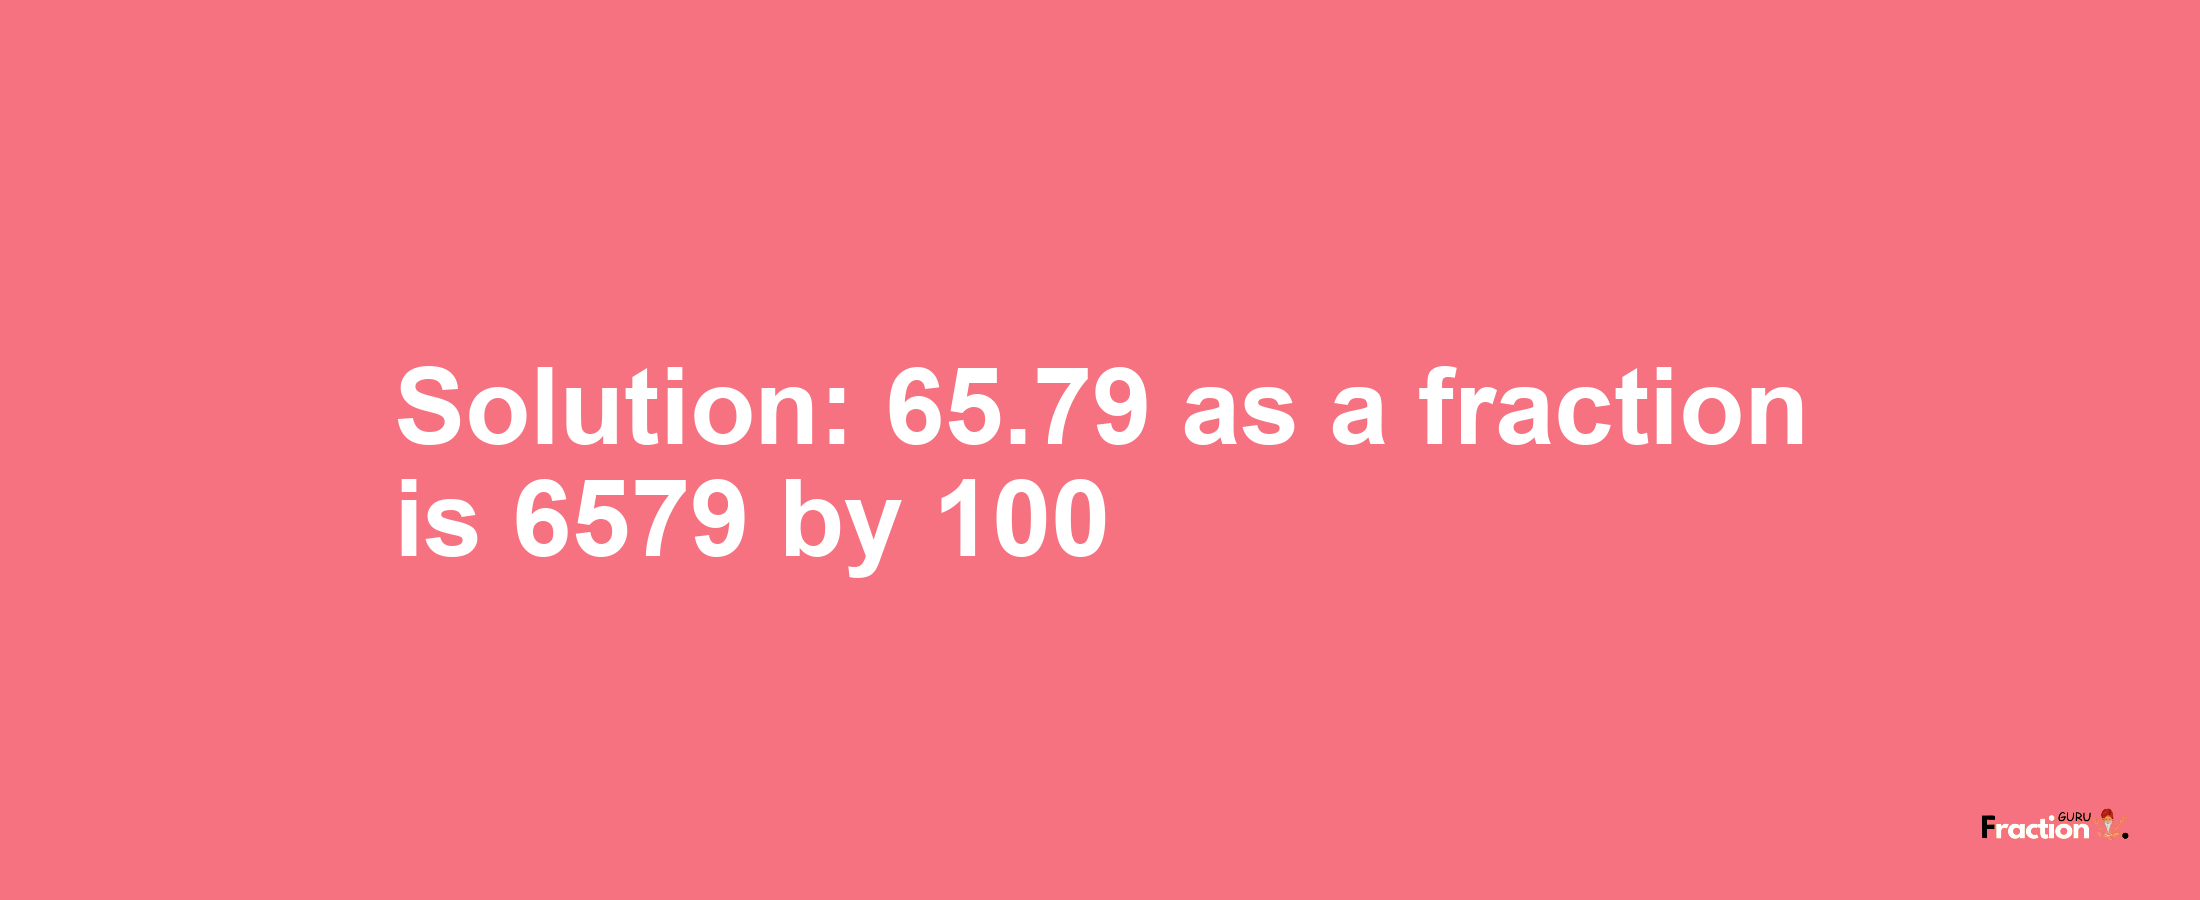 Solution:65.79 as a fraction is 6579/100